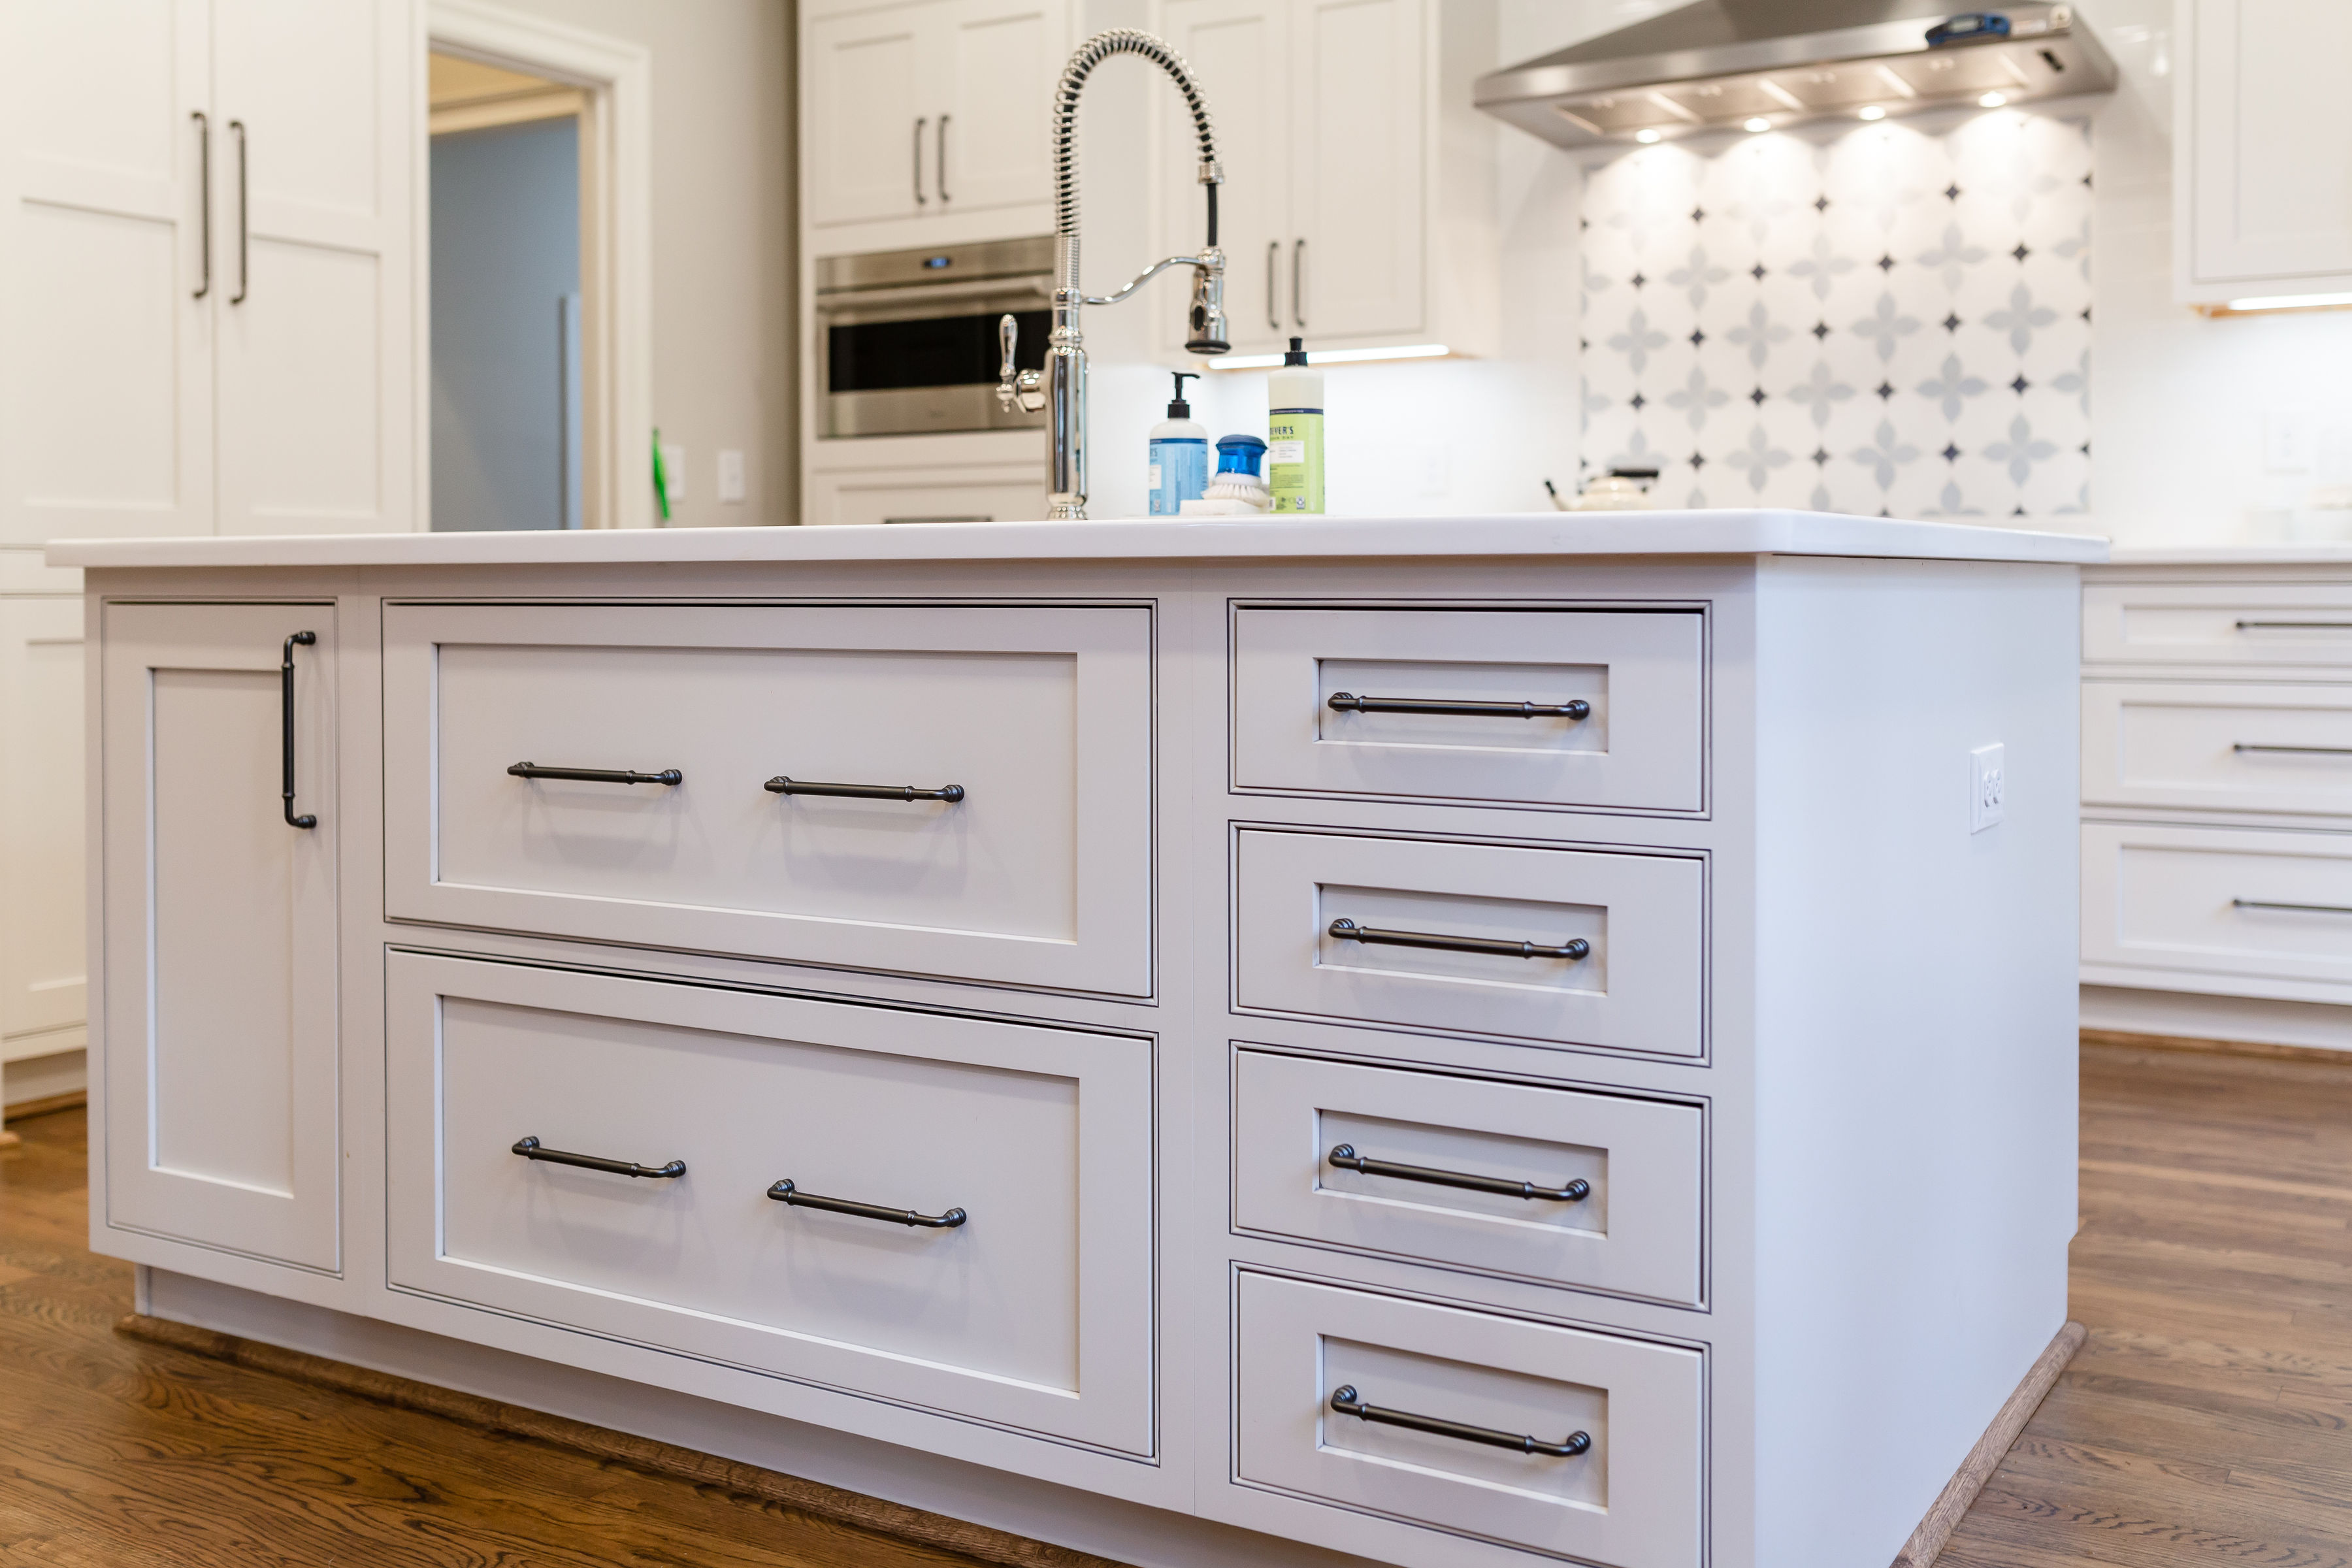 Fairhaven By Starmark Cabinetry Muse Kitchen And Bath